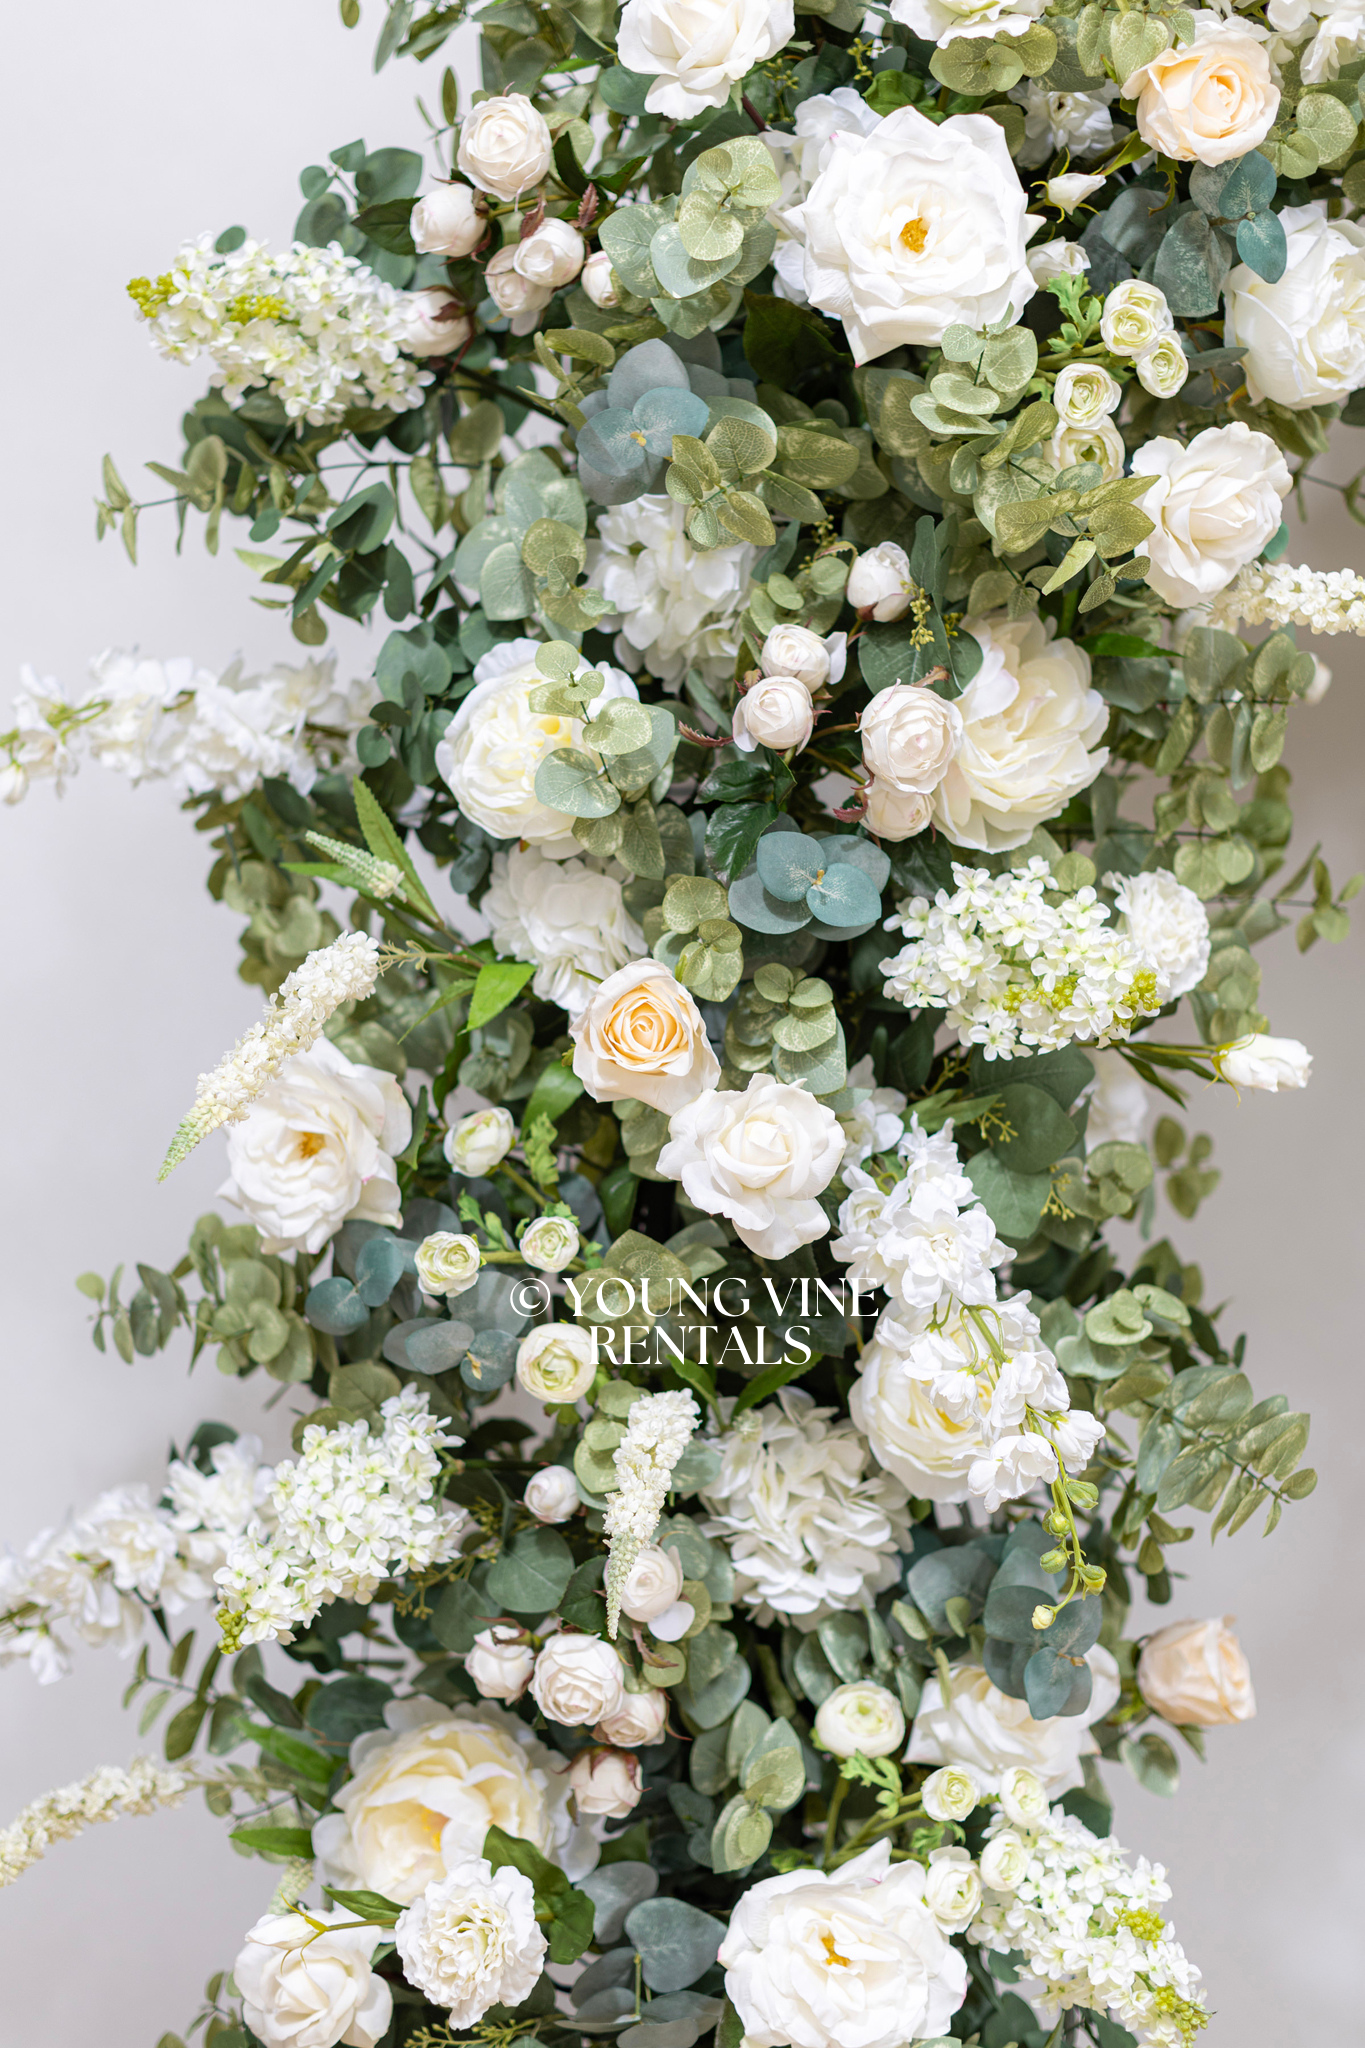 Close-up detail of lush, romantic wedding floral arbor studded with an abundance of ivory and white flowers and various types of eucalyptus foliage.